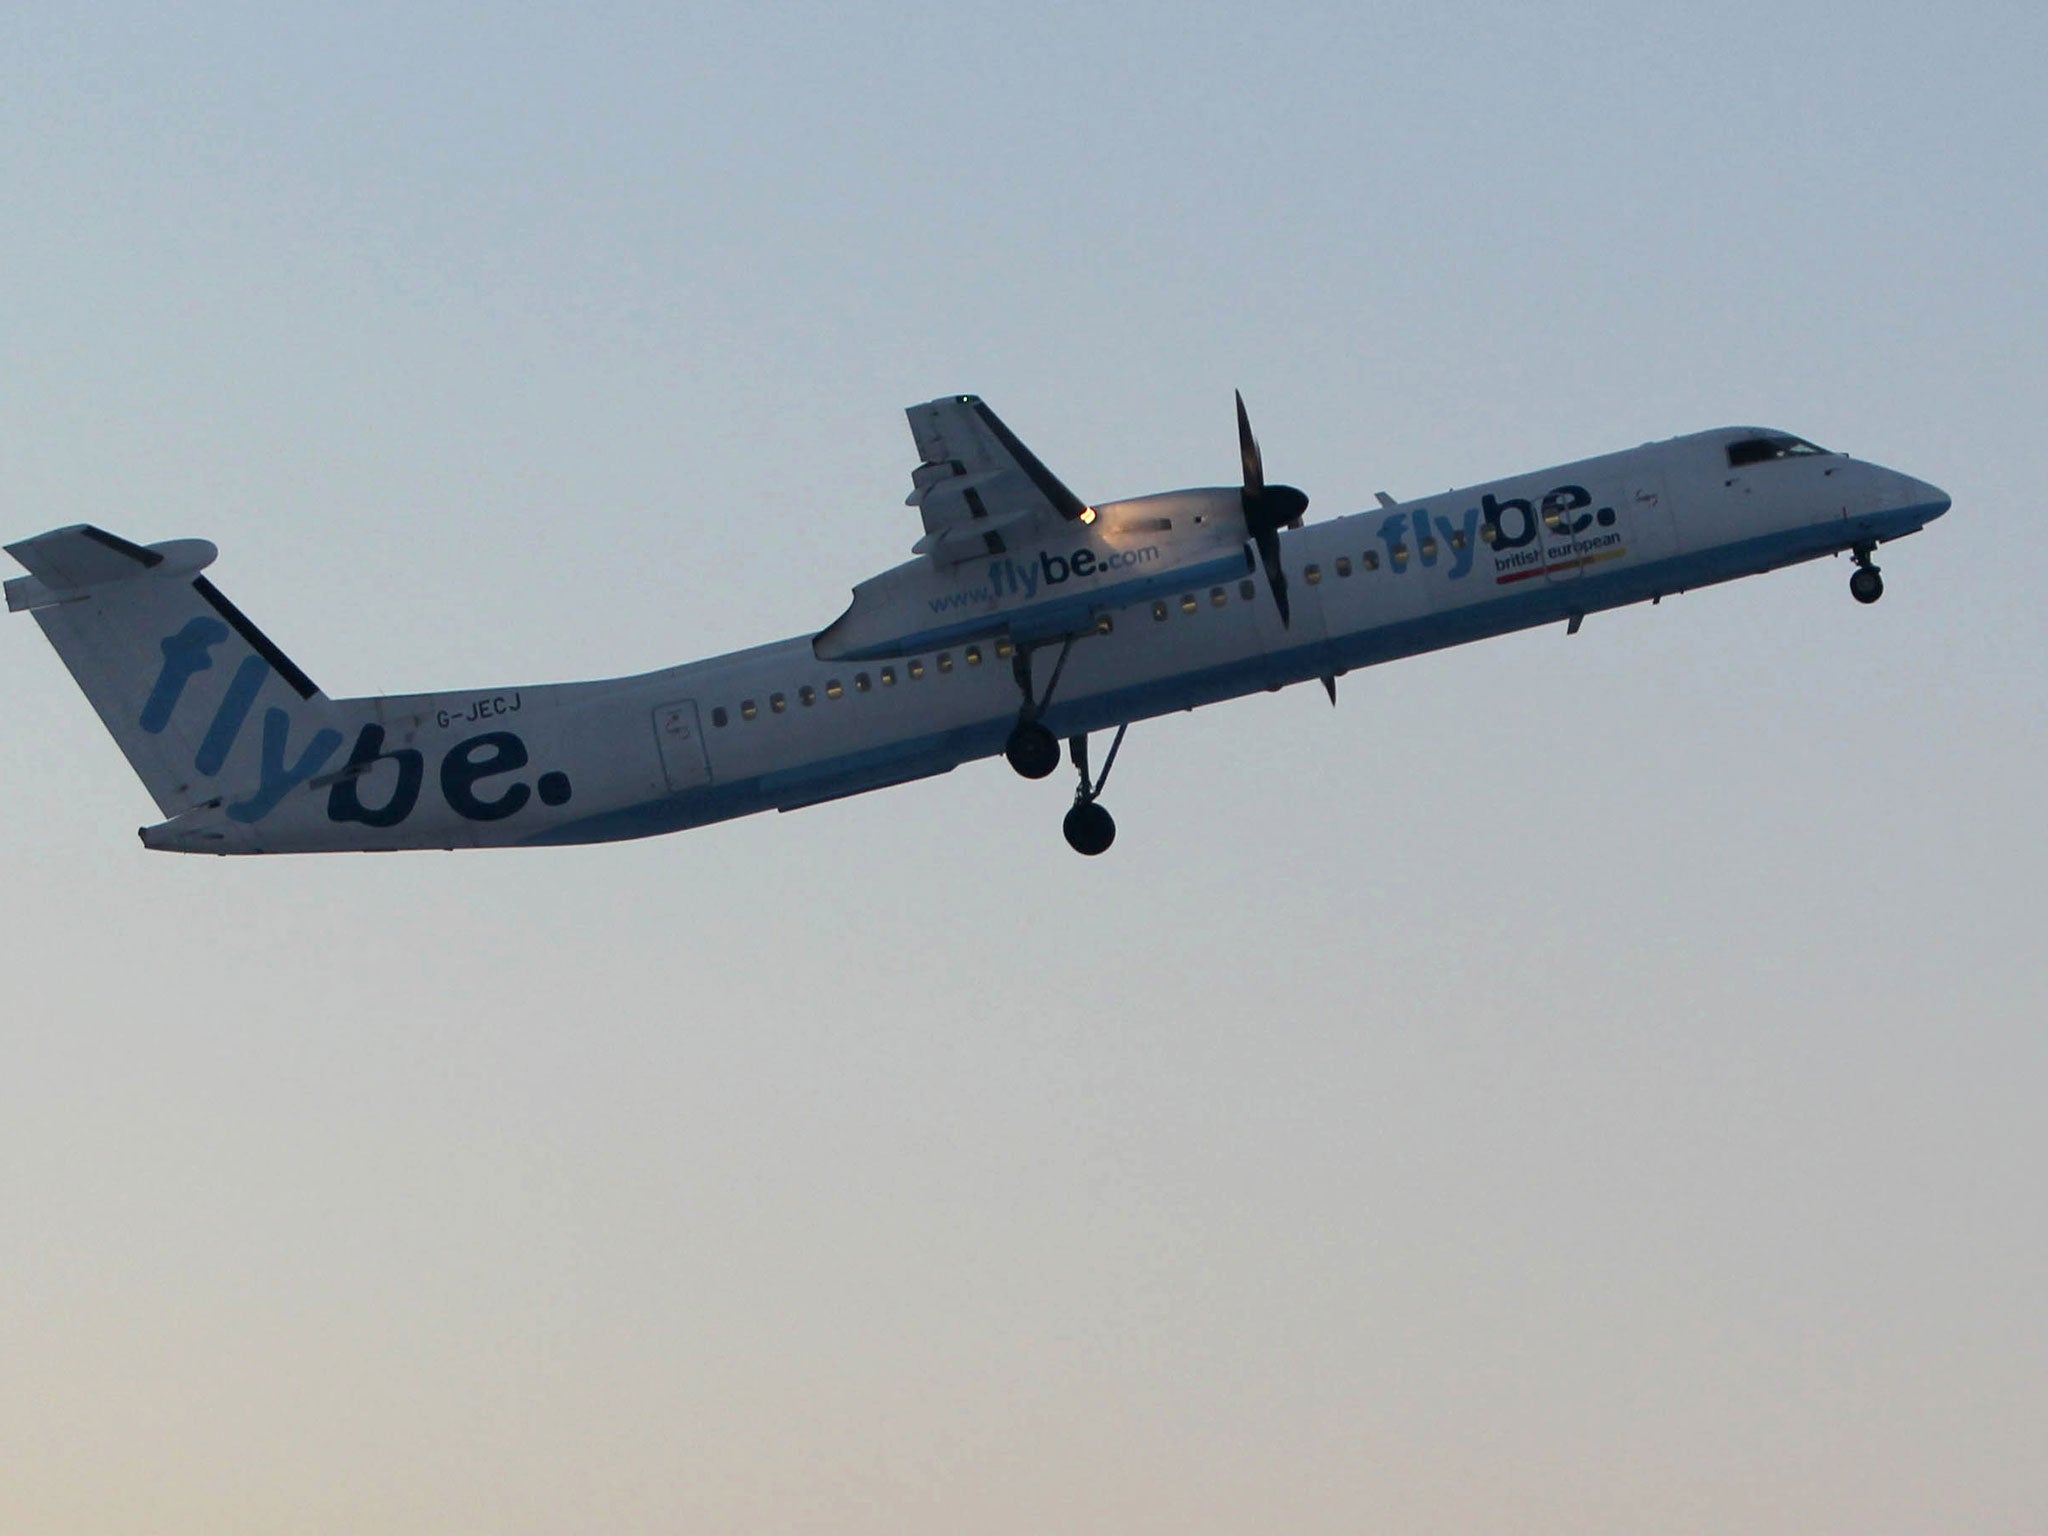 The commander diverted the Flybe aircraft to Manchester Airport